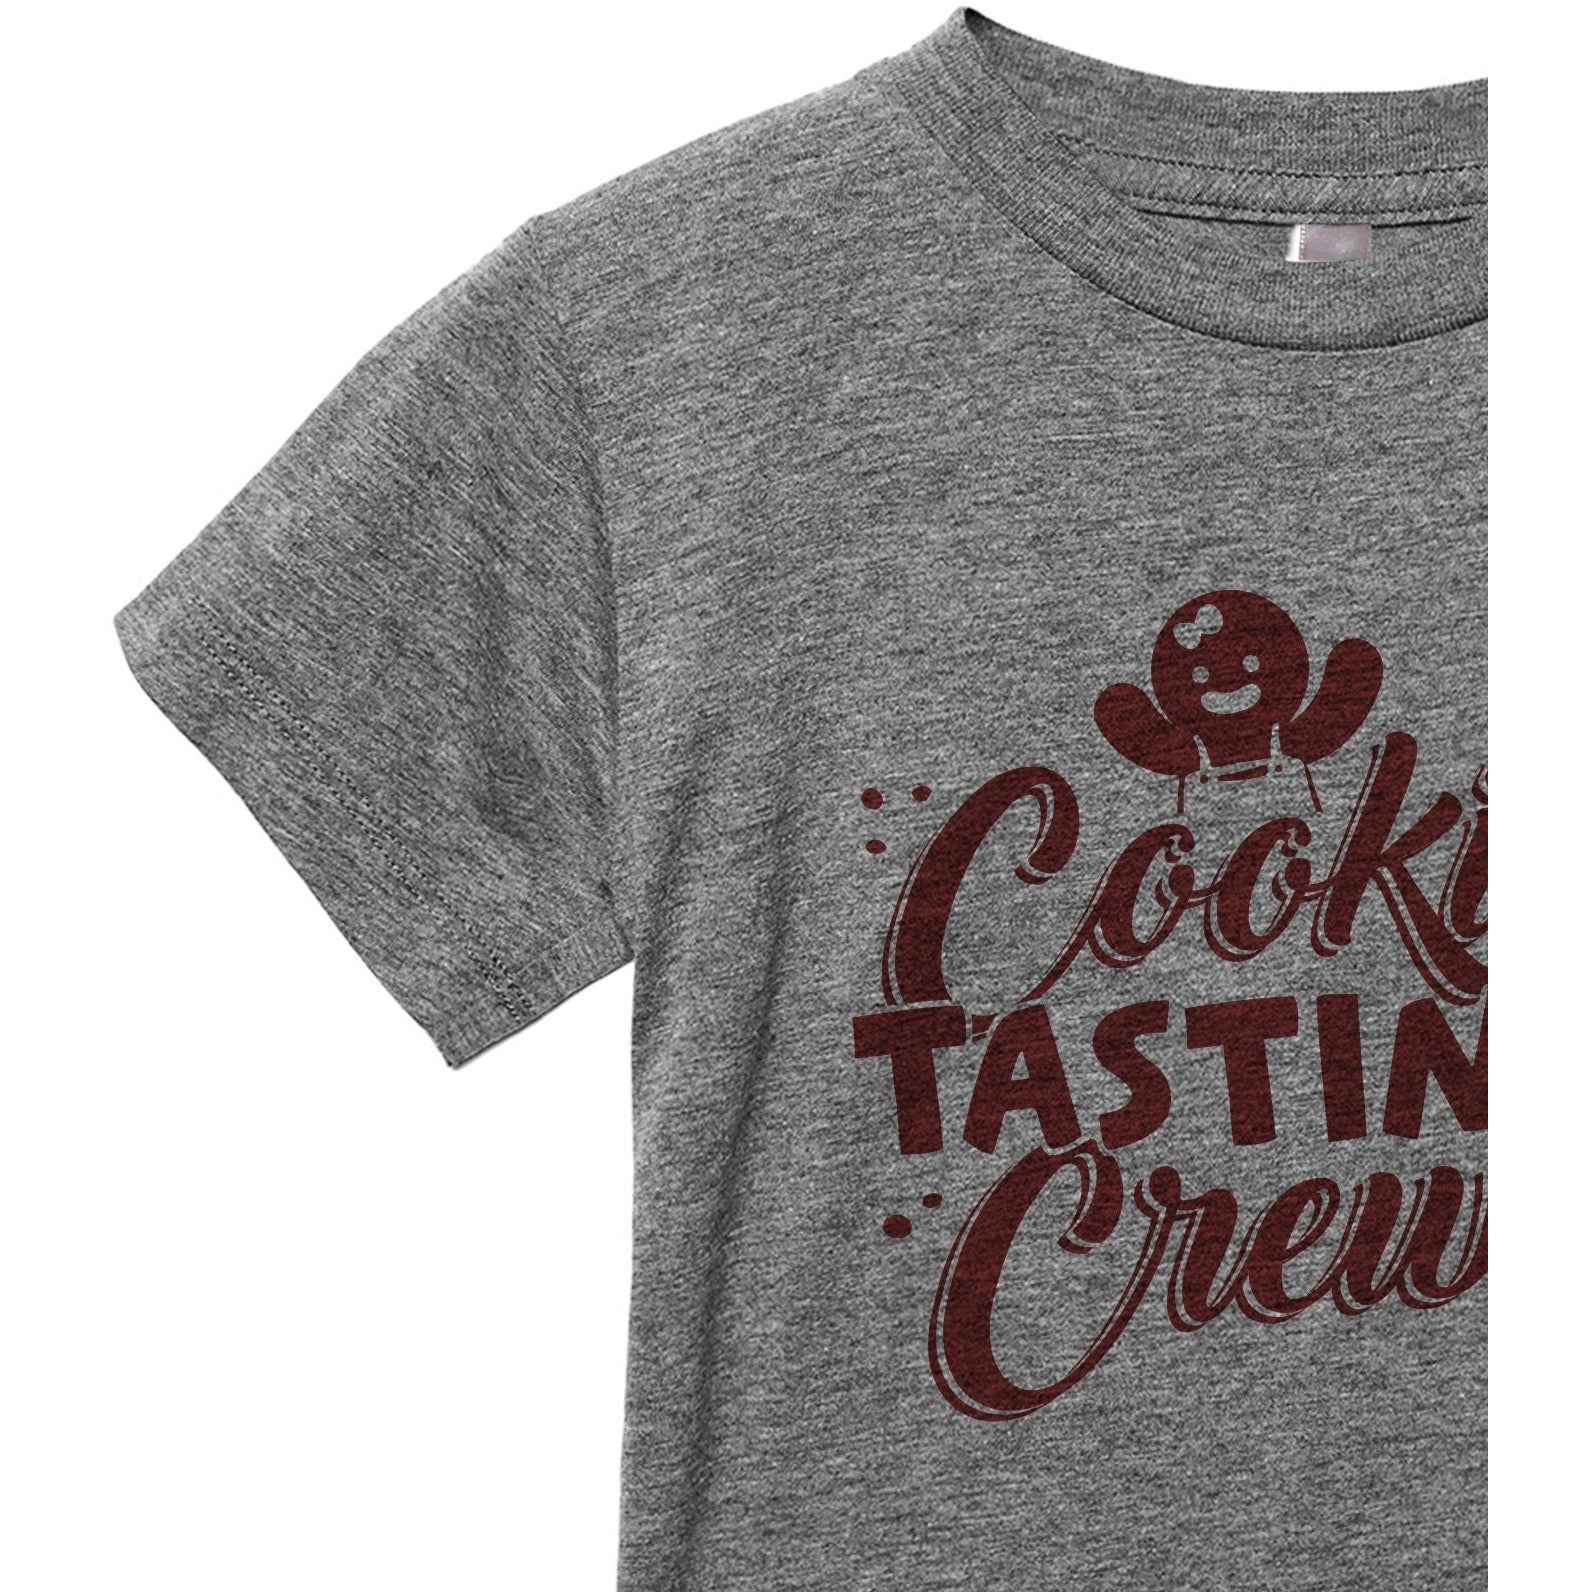 Cookie Tasting Crew Toddler's Go-To Crewneck Tee Heather Grey Scarlet Print Close Up Sleeves Collar Details
